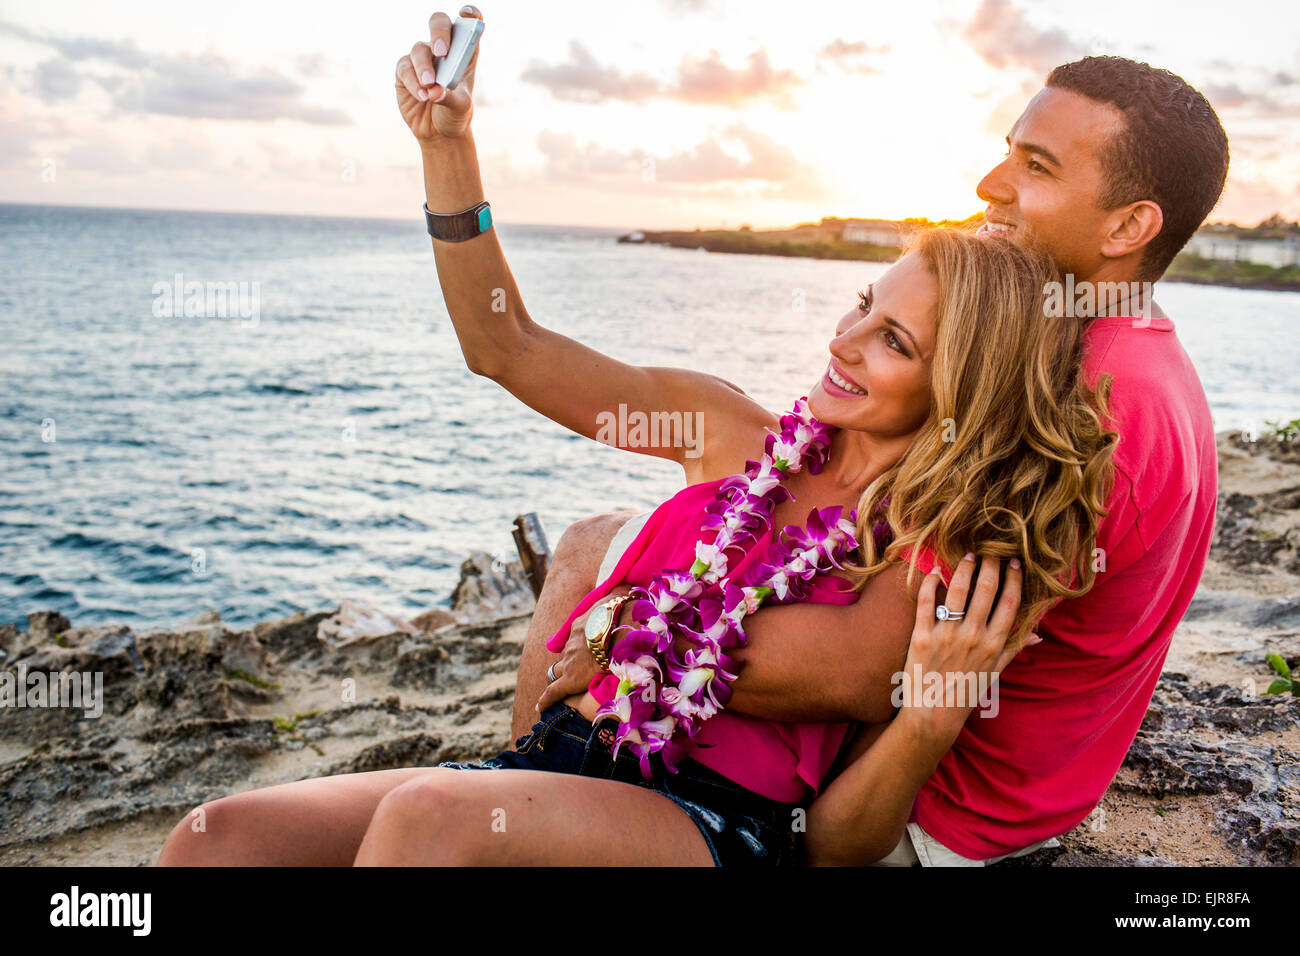 Couple taking cell phone photograph on beach Stock Photo